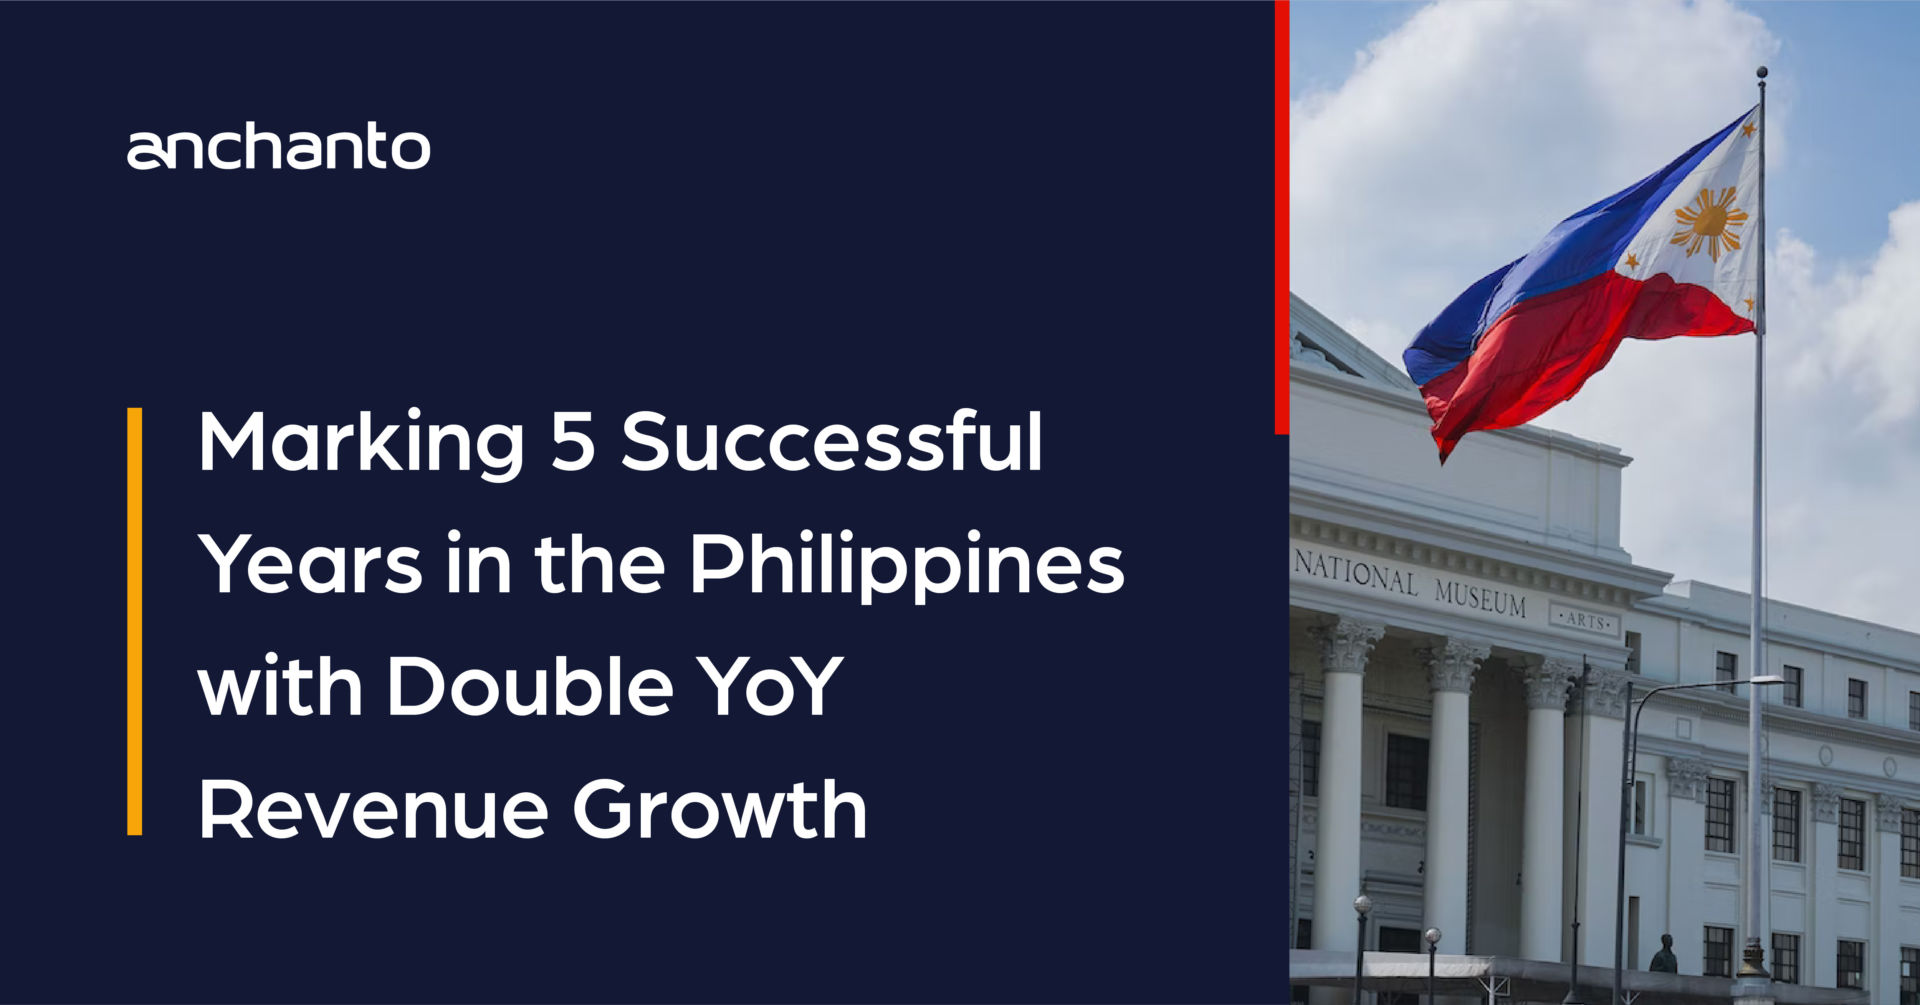 Anchanto marks 5th year in Philippines with double YOY revenue growth